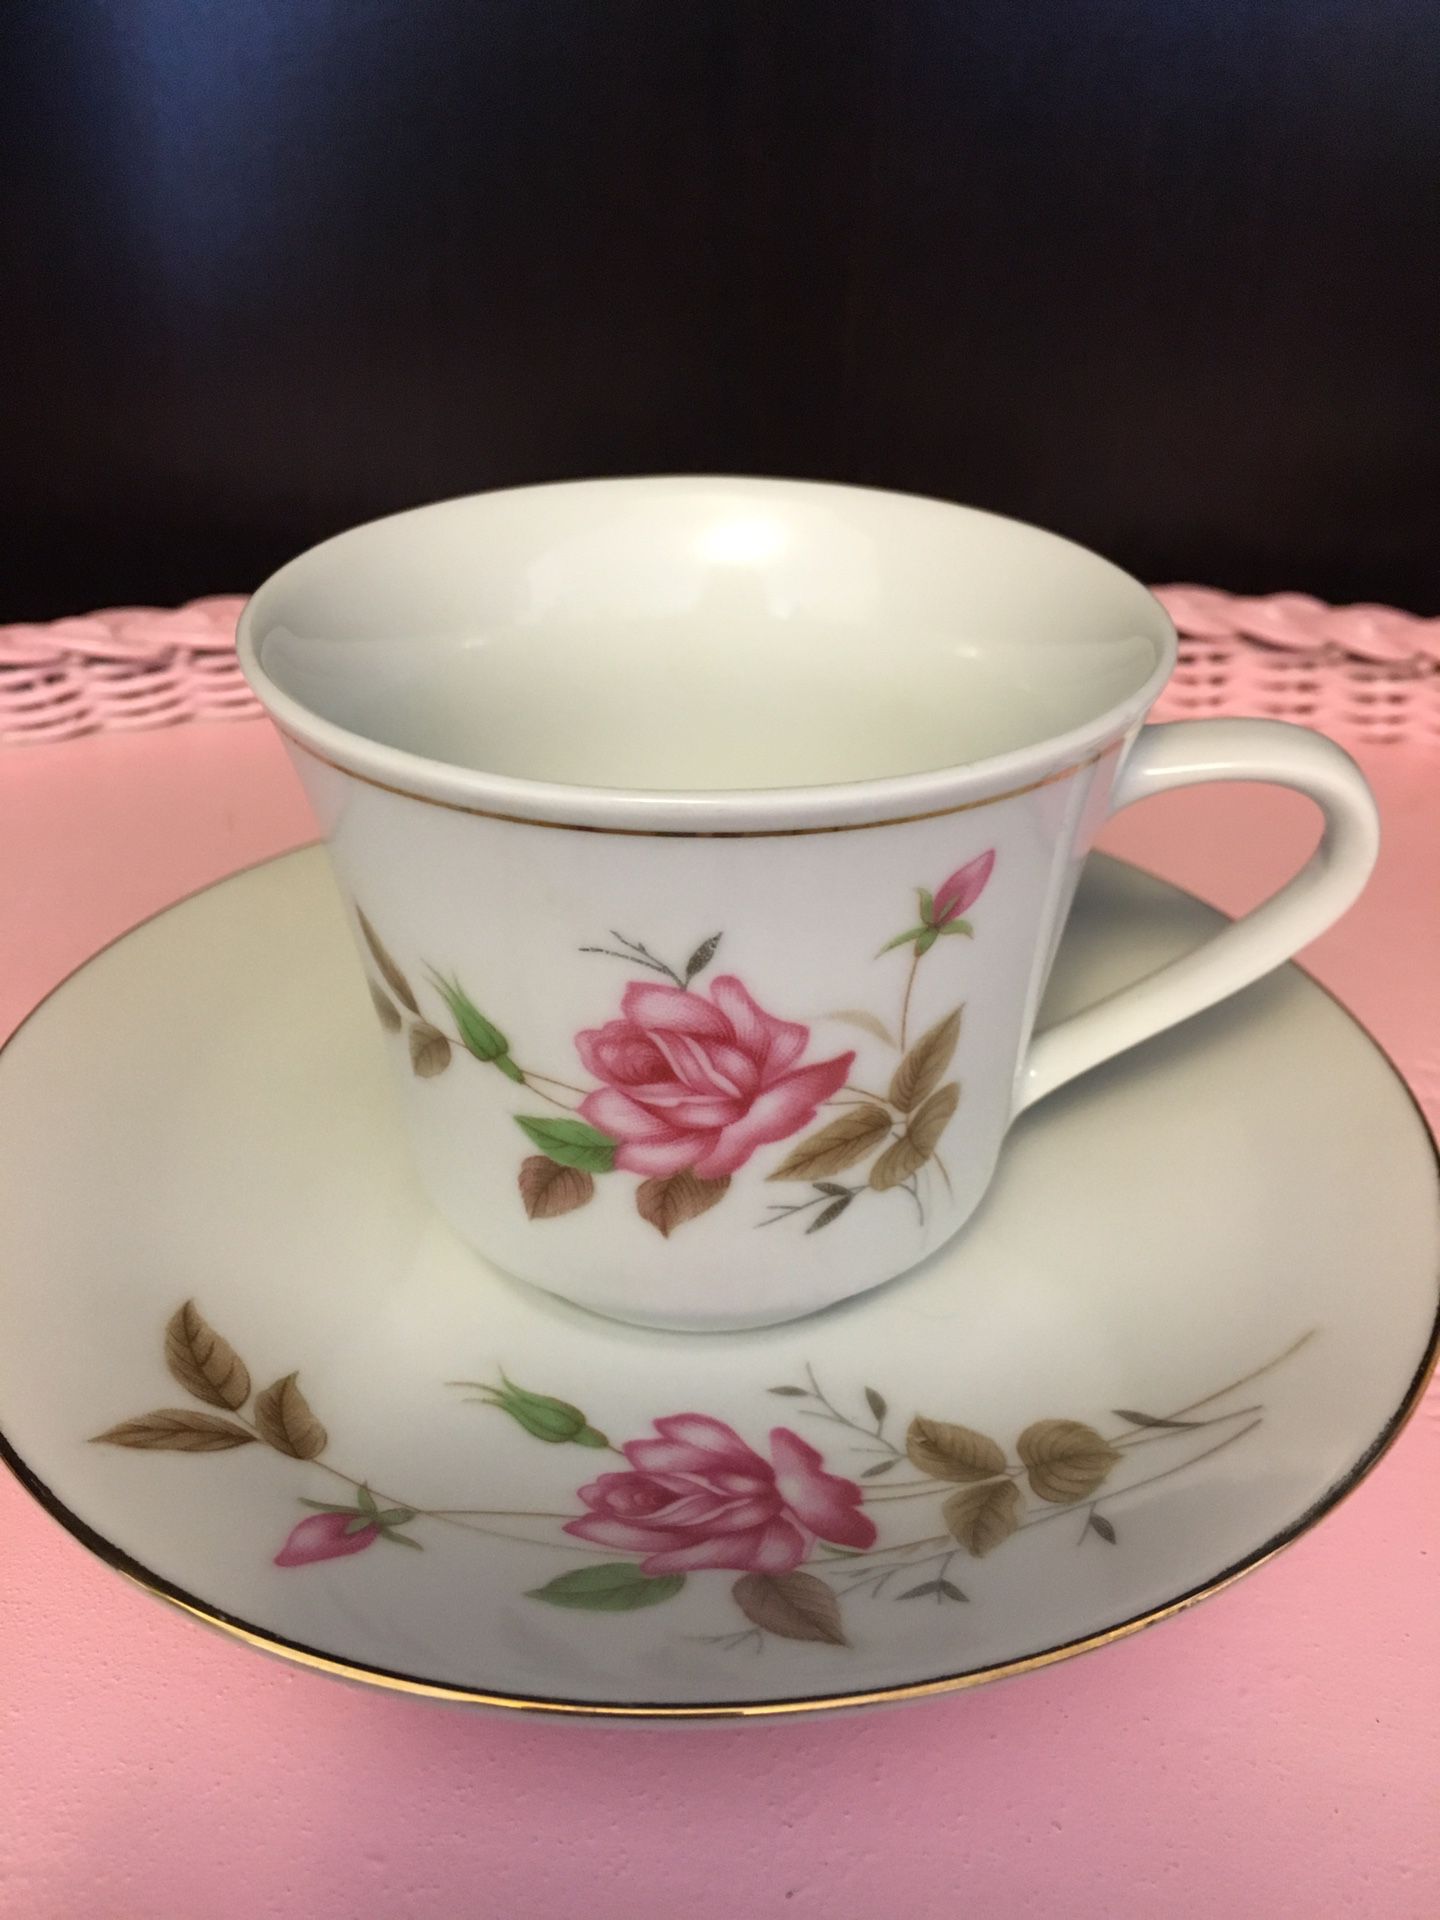 Single Rose (China) vintage tea cup and saucer